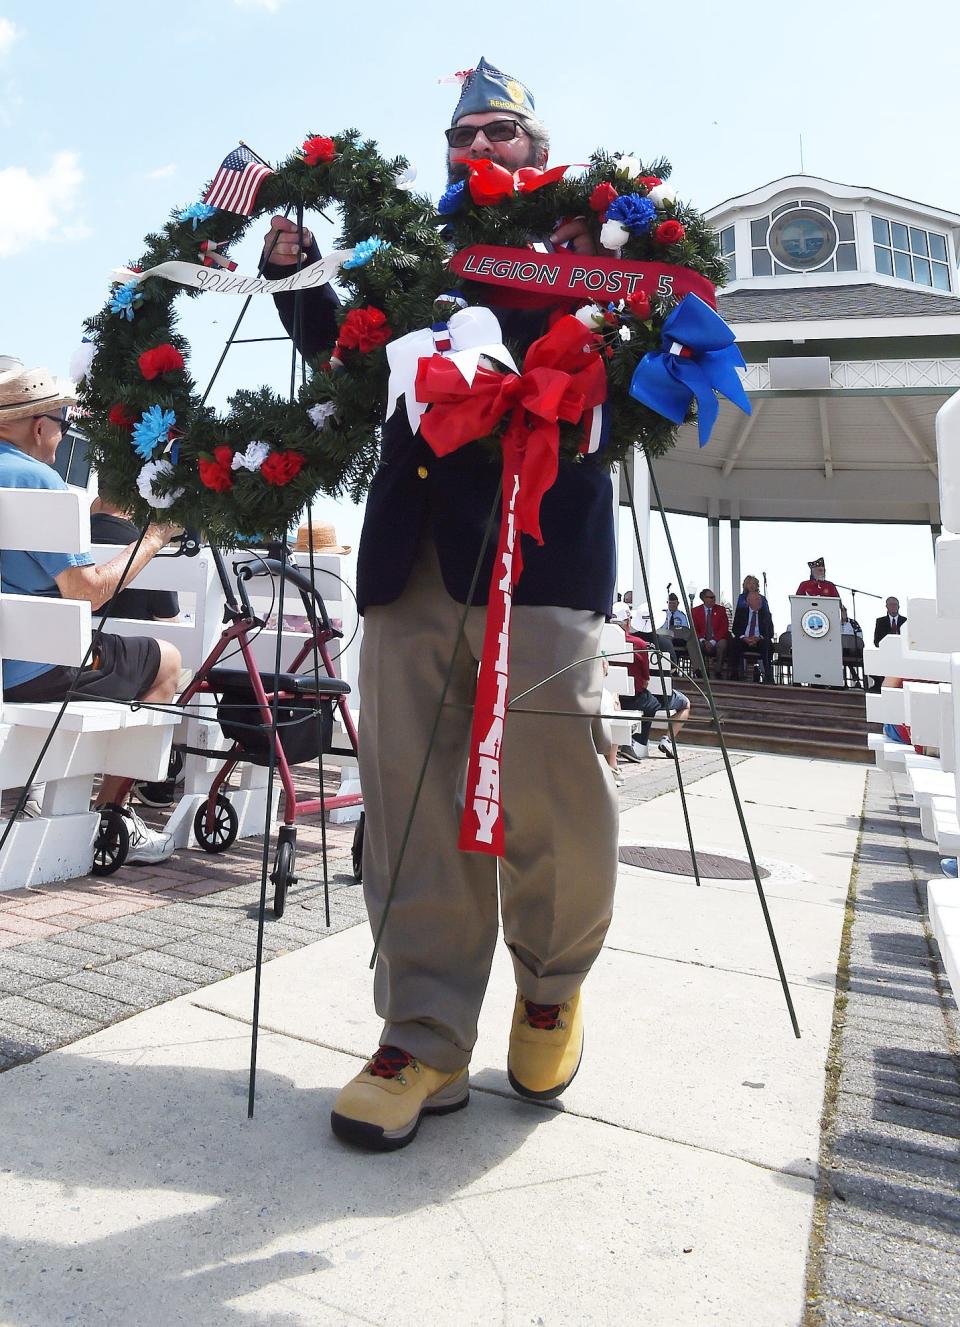 Memorial Day Services were held at the Rehoboth Bandstand on Monday May 30, 2022, sponsored by the Henlopen American Legion Post 5 of Rehoboth Beach. Speakers and a wreath laying highlighted the ceremony in Downtown Rehoboth Beach.